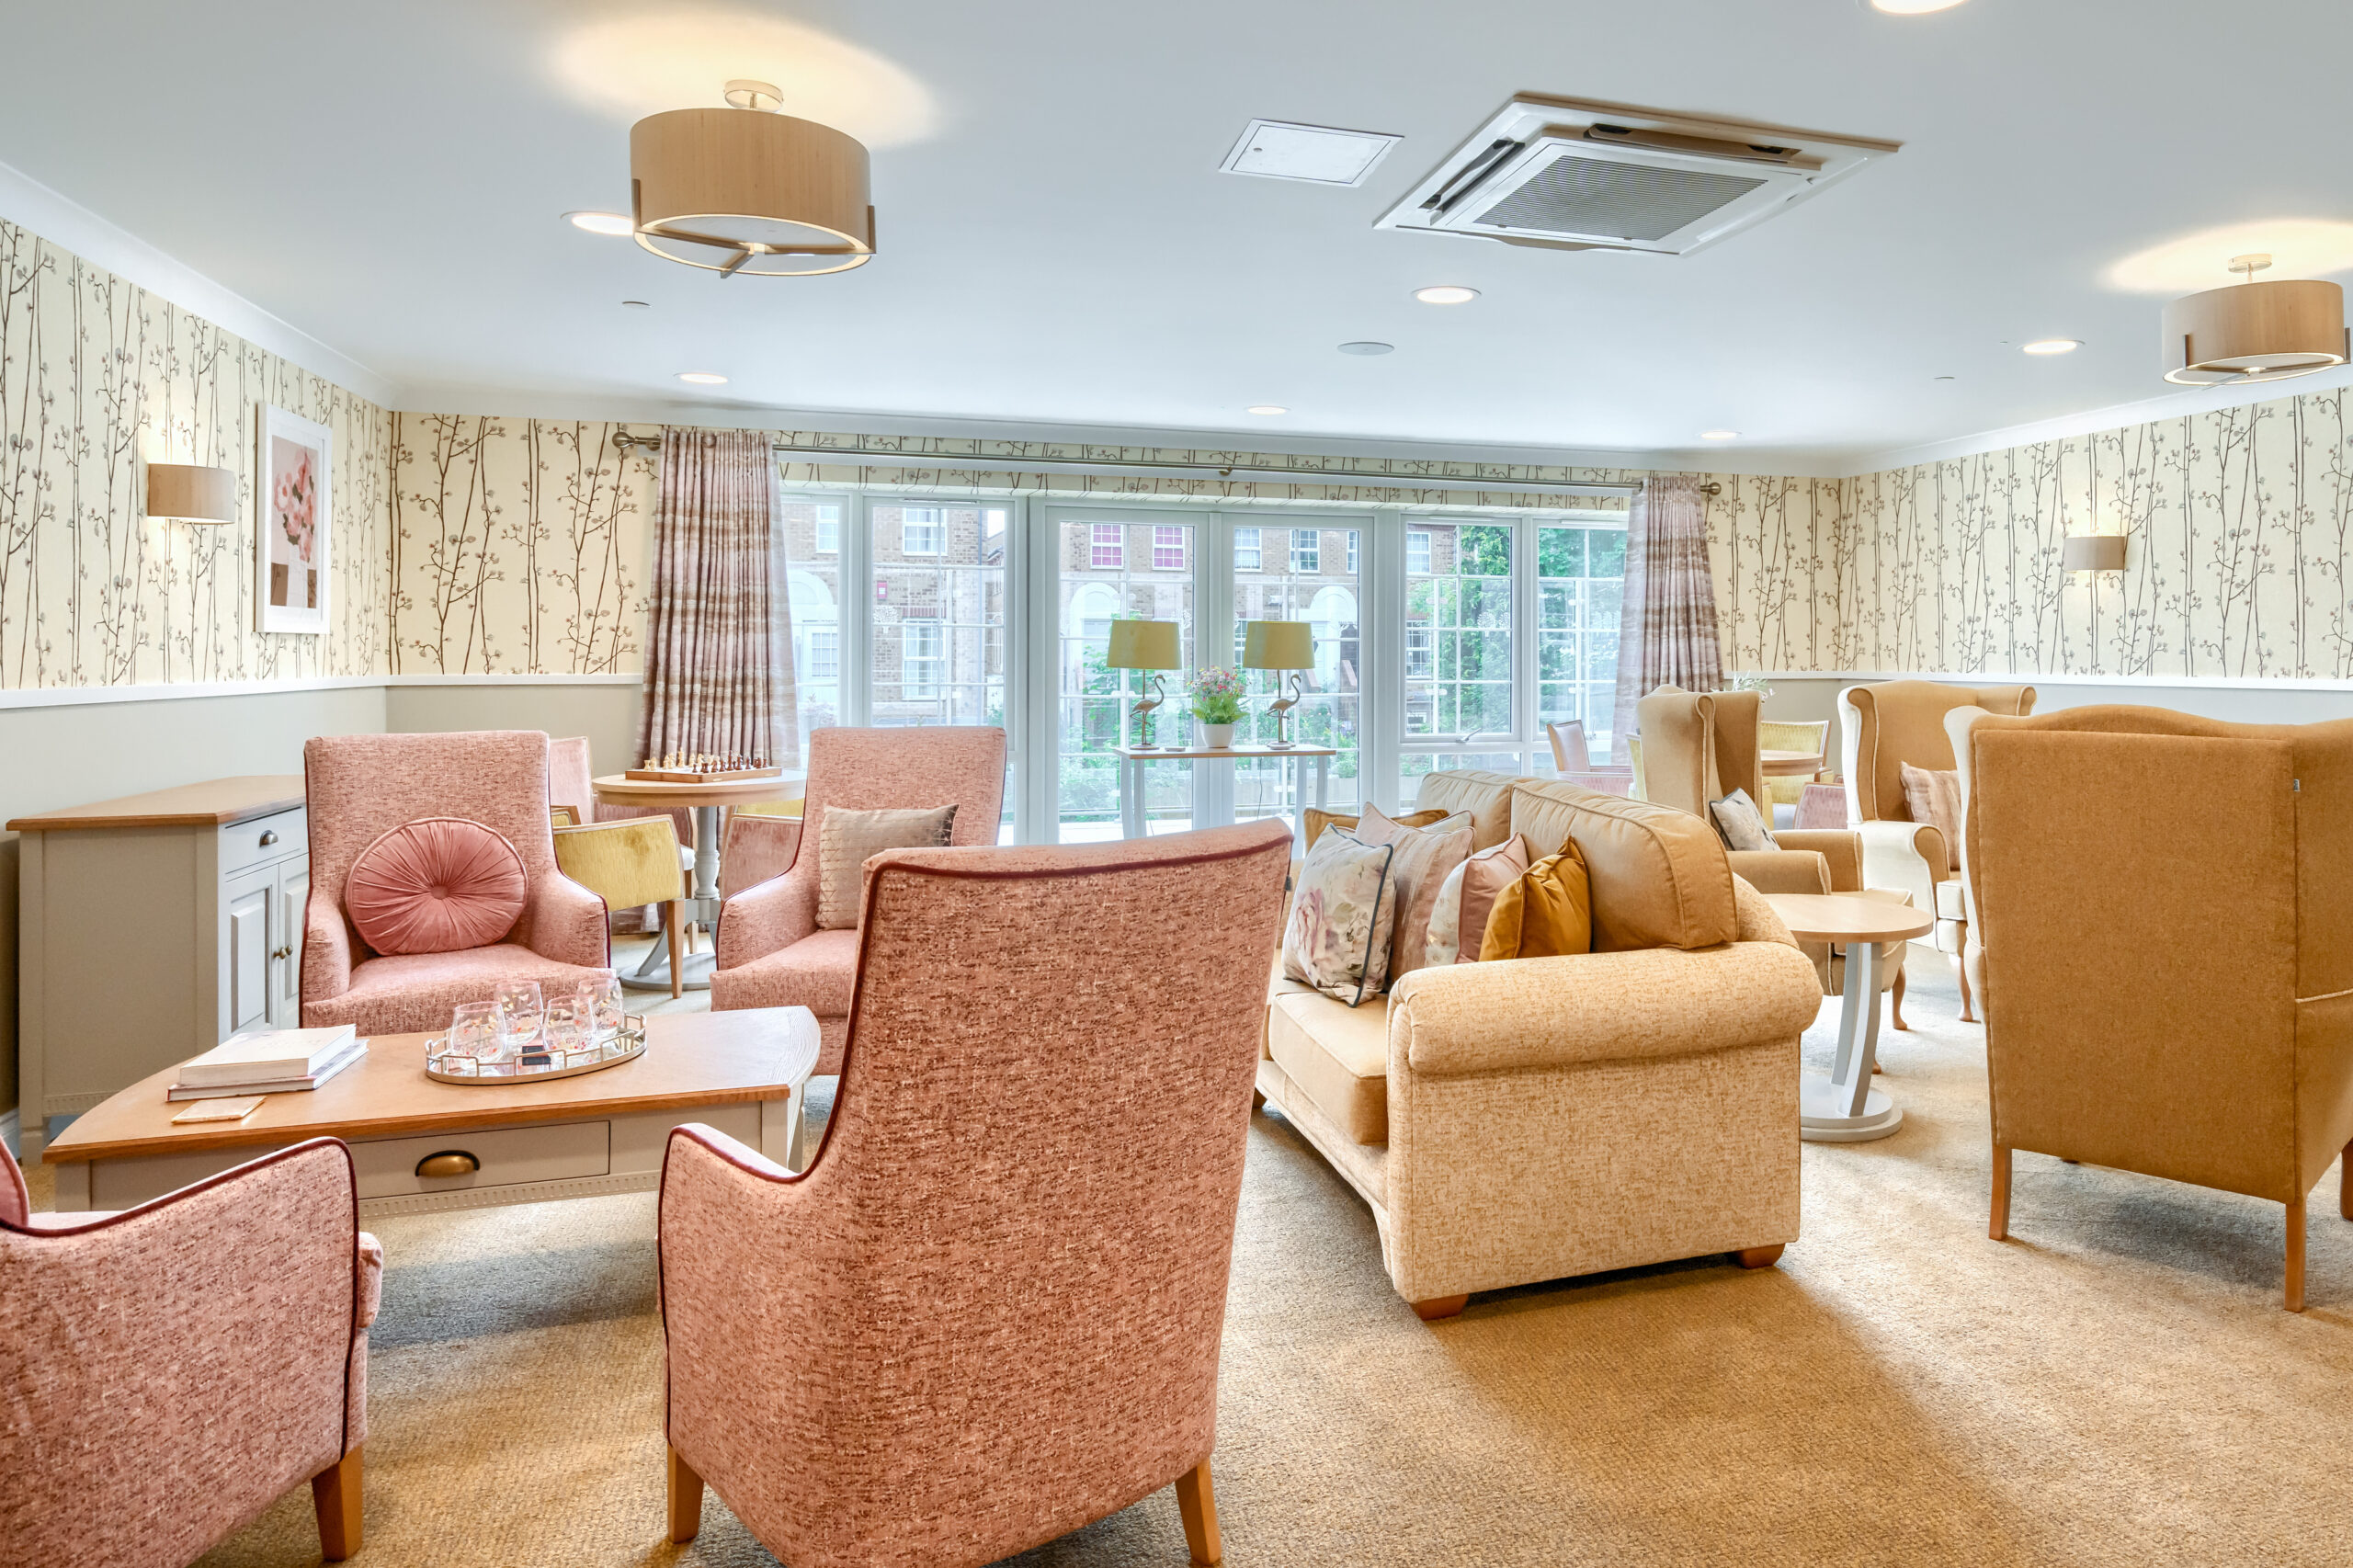 Lounge area with table and chairs at Birchwood Heights Care Home in Swanley